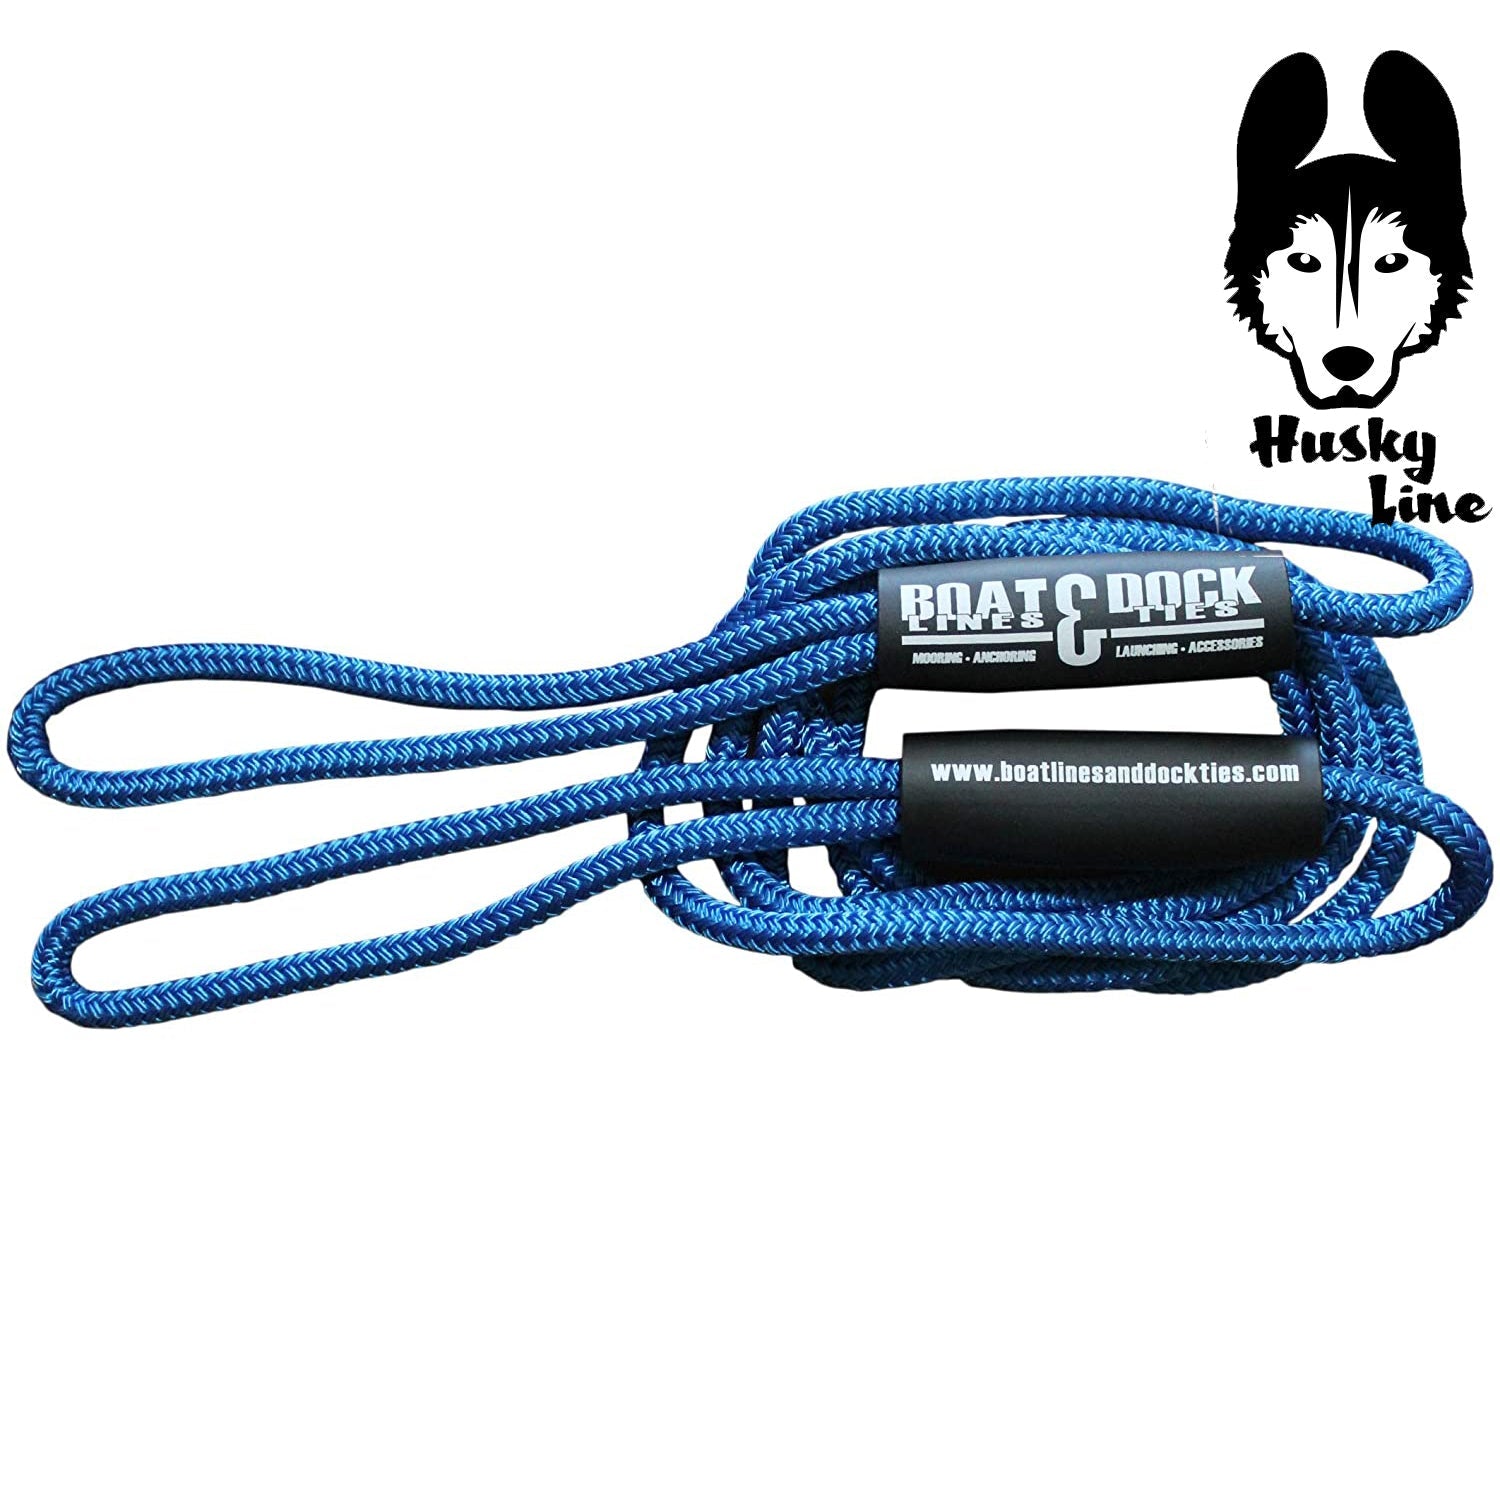 Boat Throw Rope- "Husky Line" 2 Loop Double Braided Nylon Rope, Stitched Loops and Floats